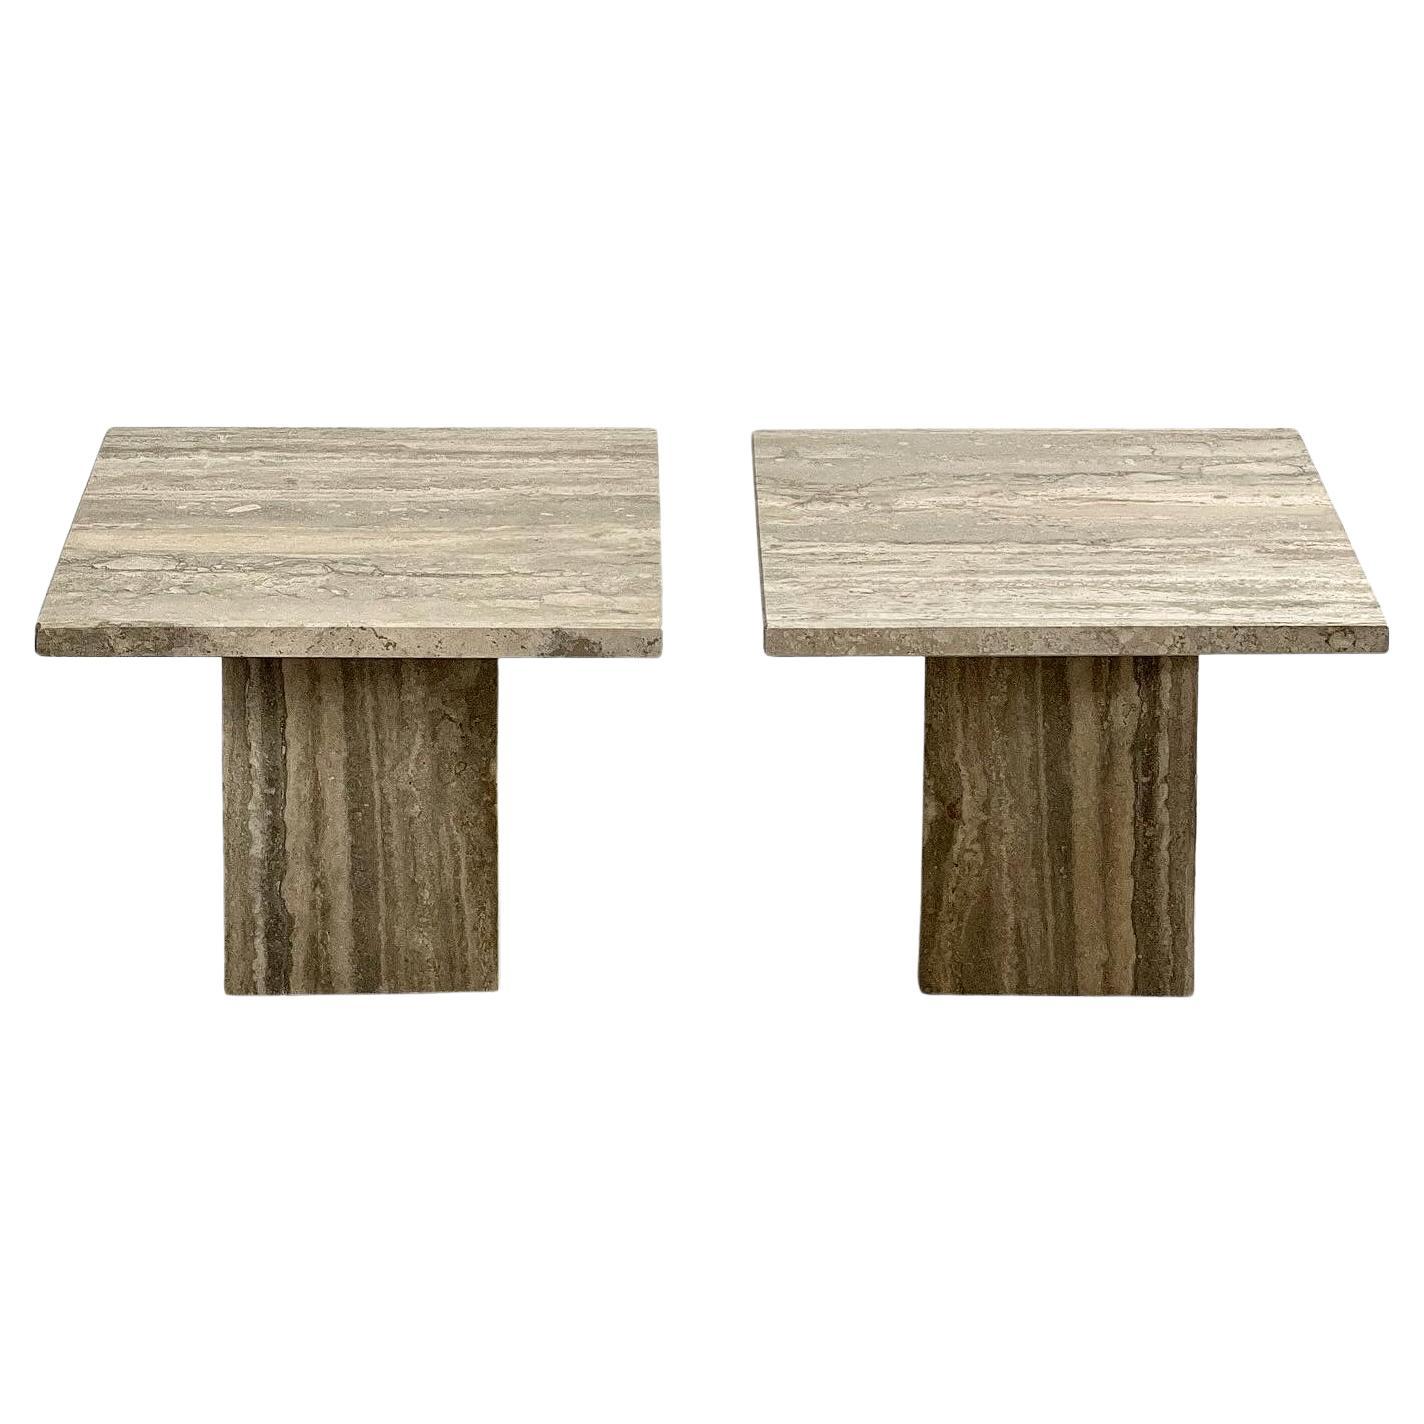 Set of Two Mid-Century Modern Side Tables in Travertine, Urban Wabi Style, Pair For Sale